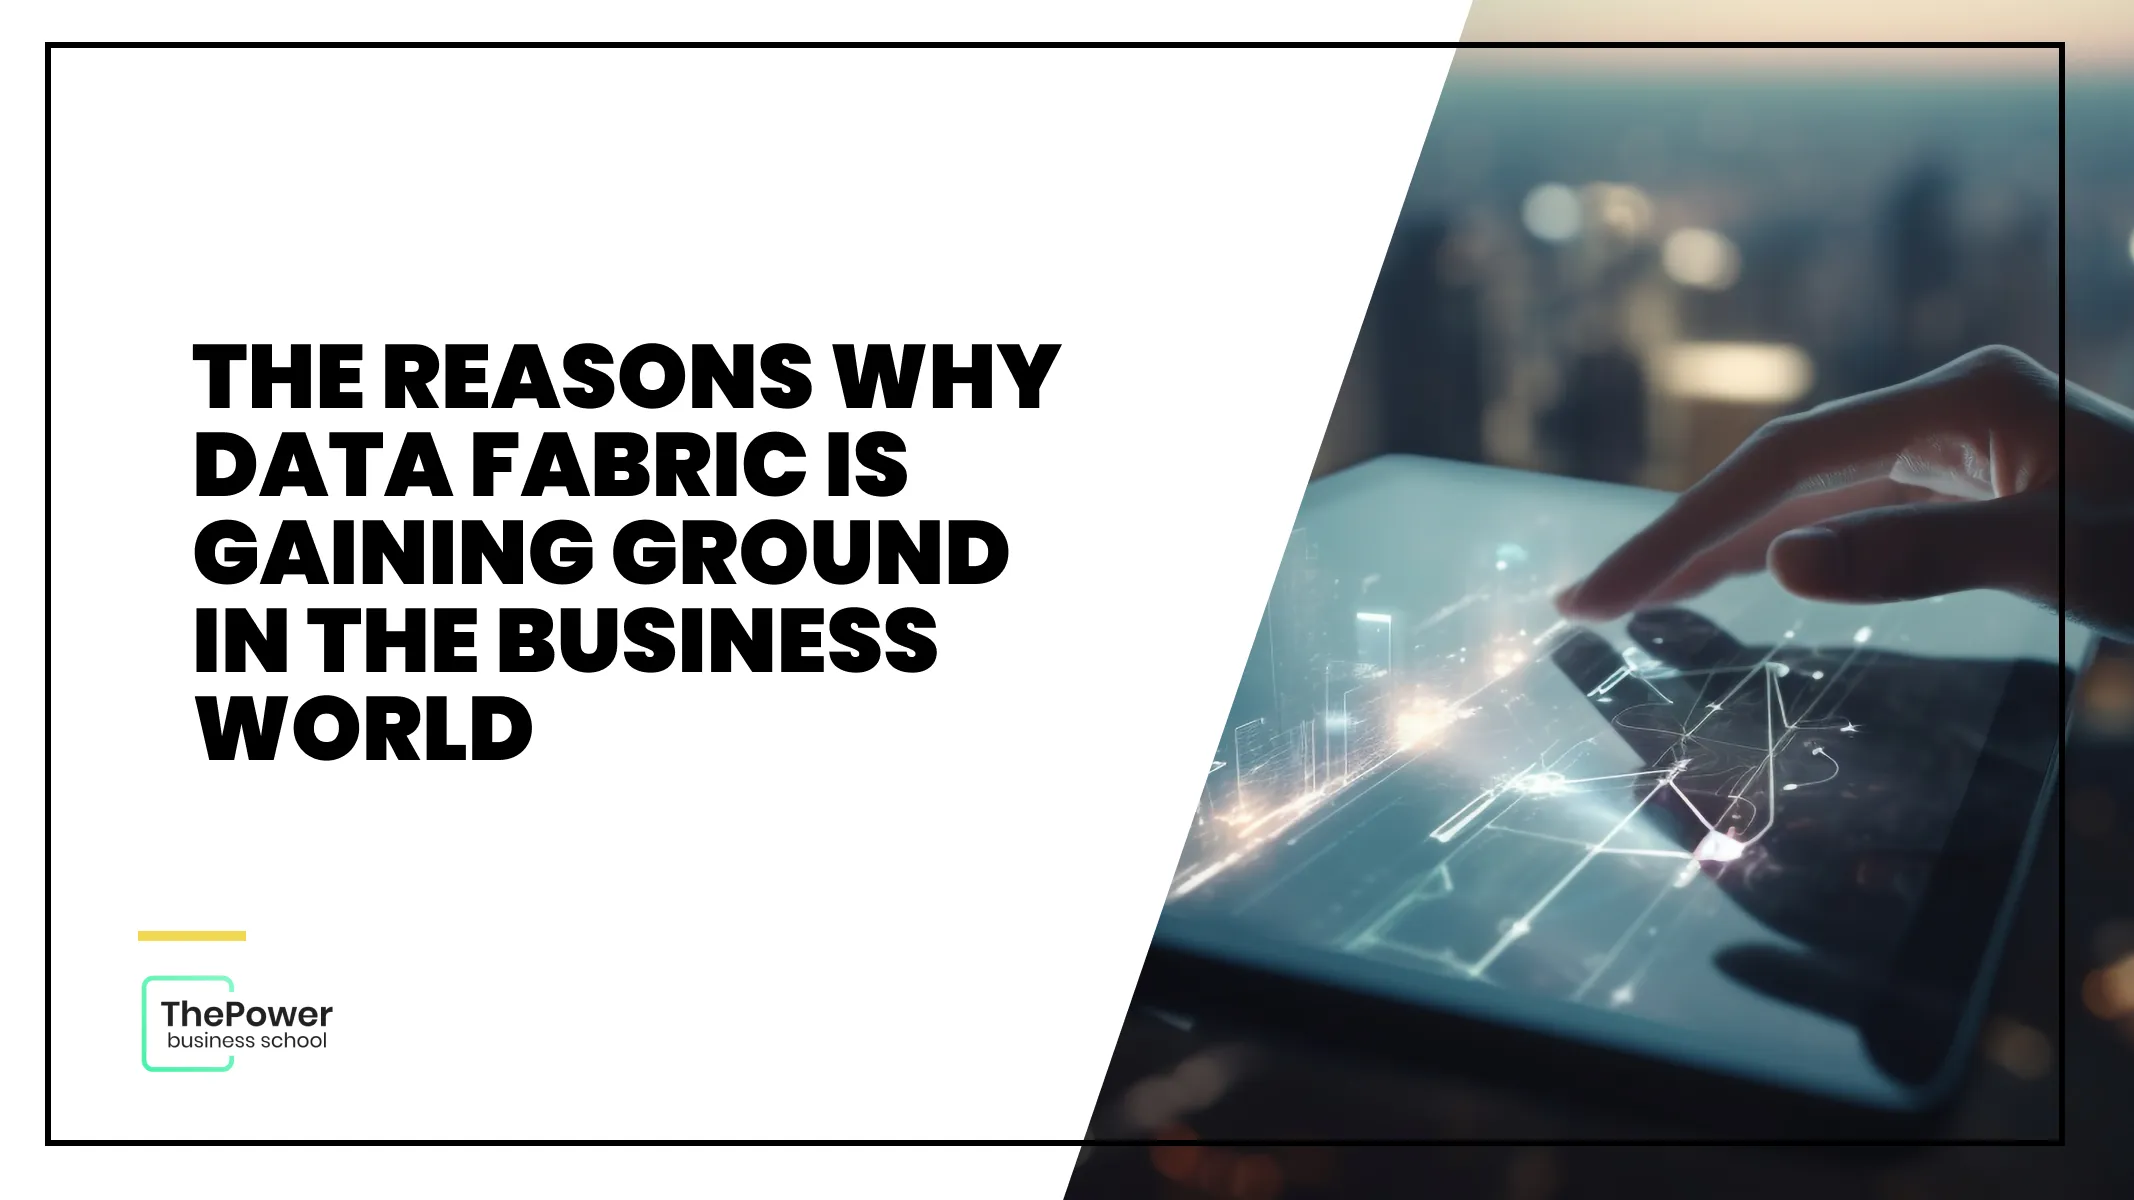 The reasons why data fabric is gaining ground in the business world